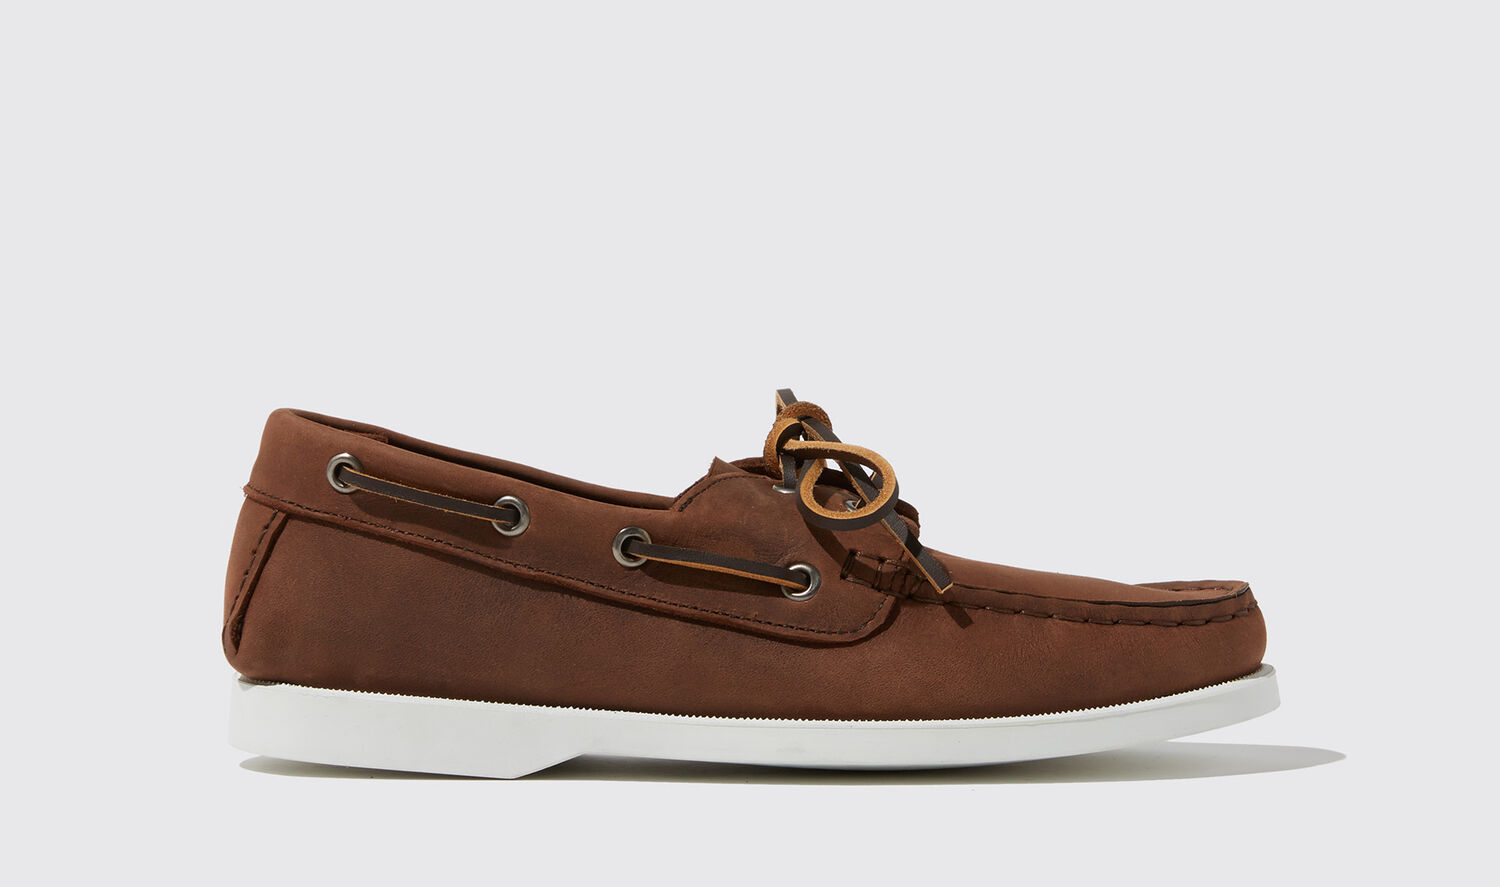 Scarosso Oprah Boat Shoes In Brown - Nubuck Leather